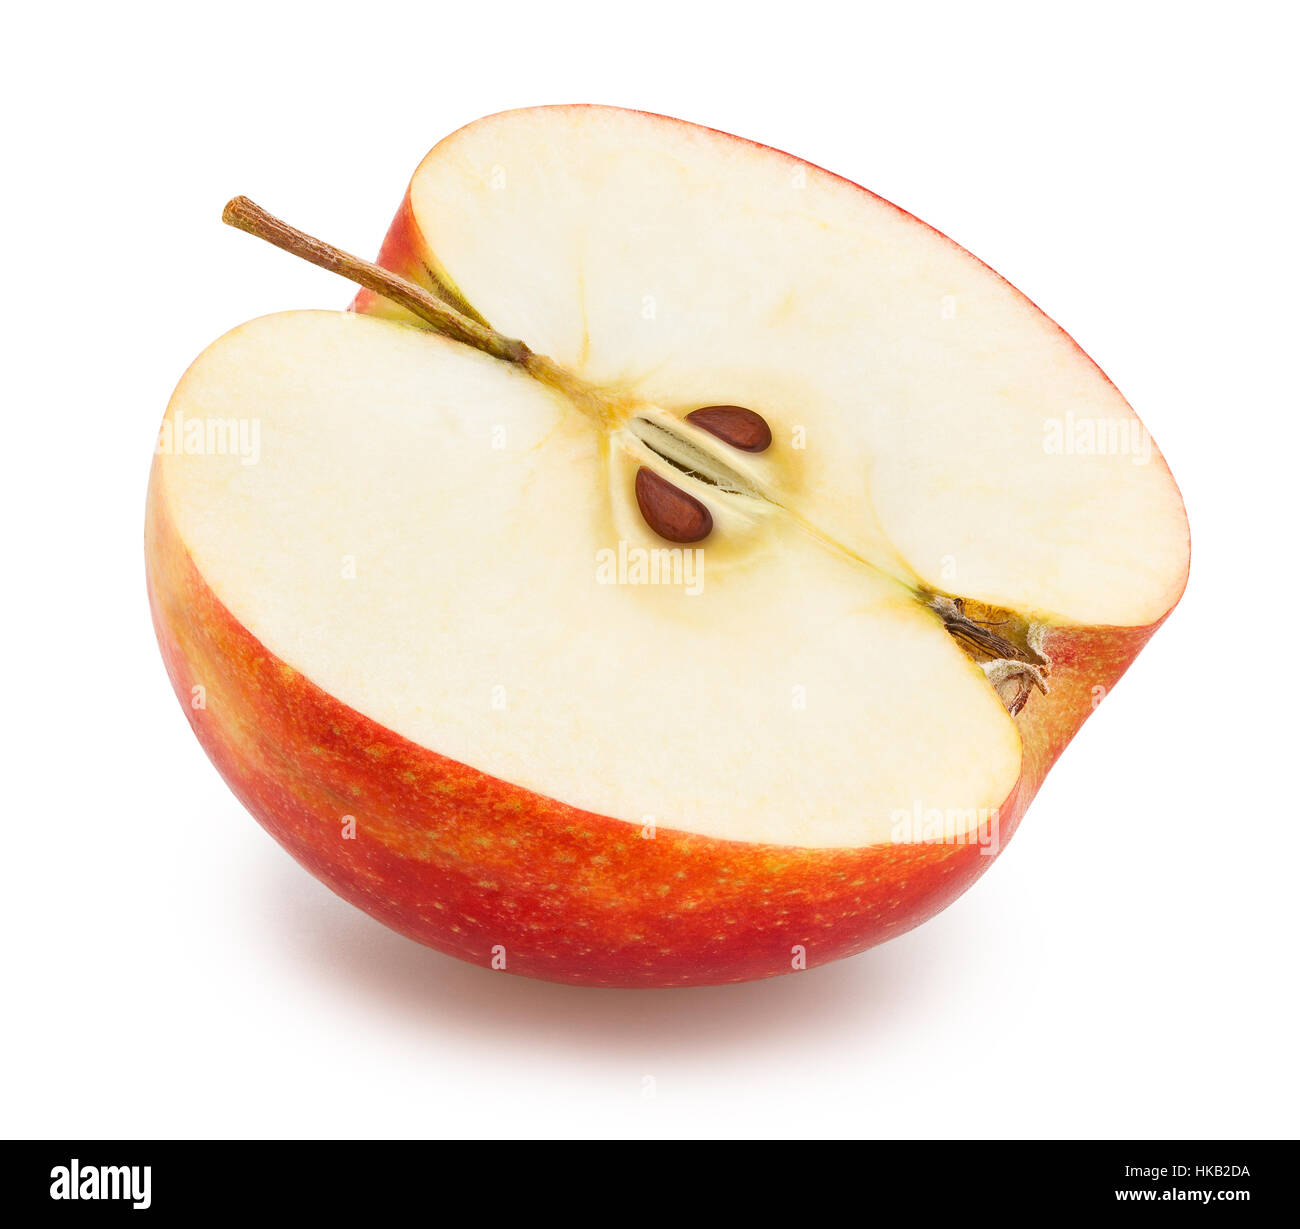 sliced red apple isolated Stock Photo